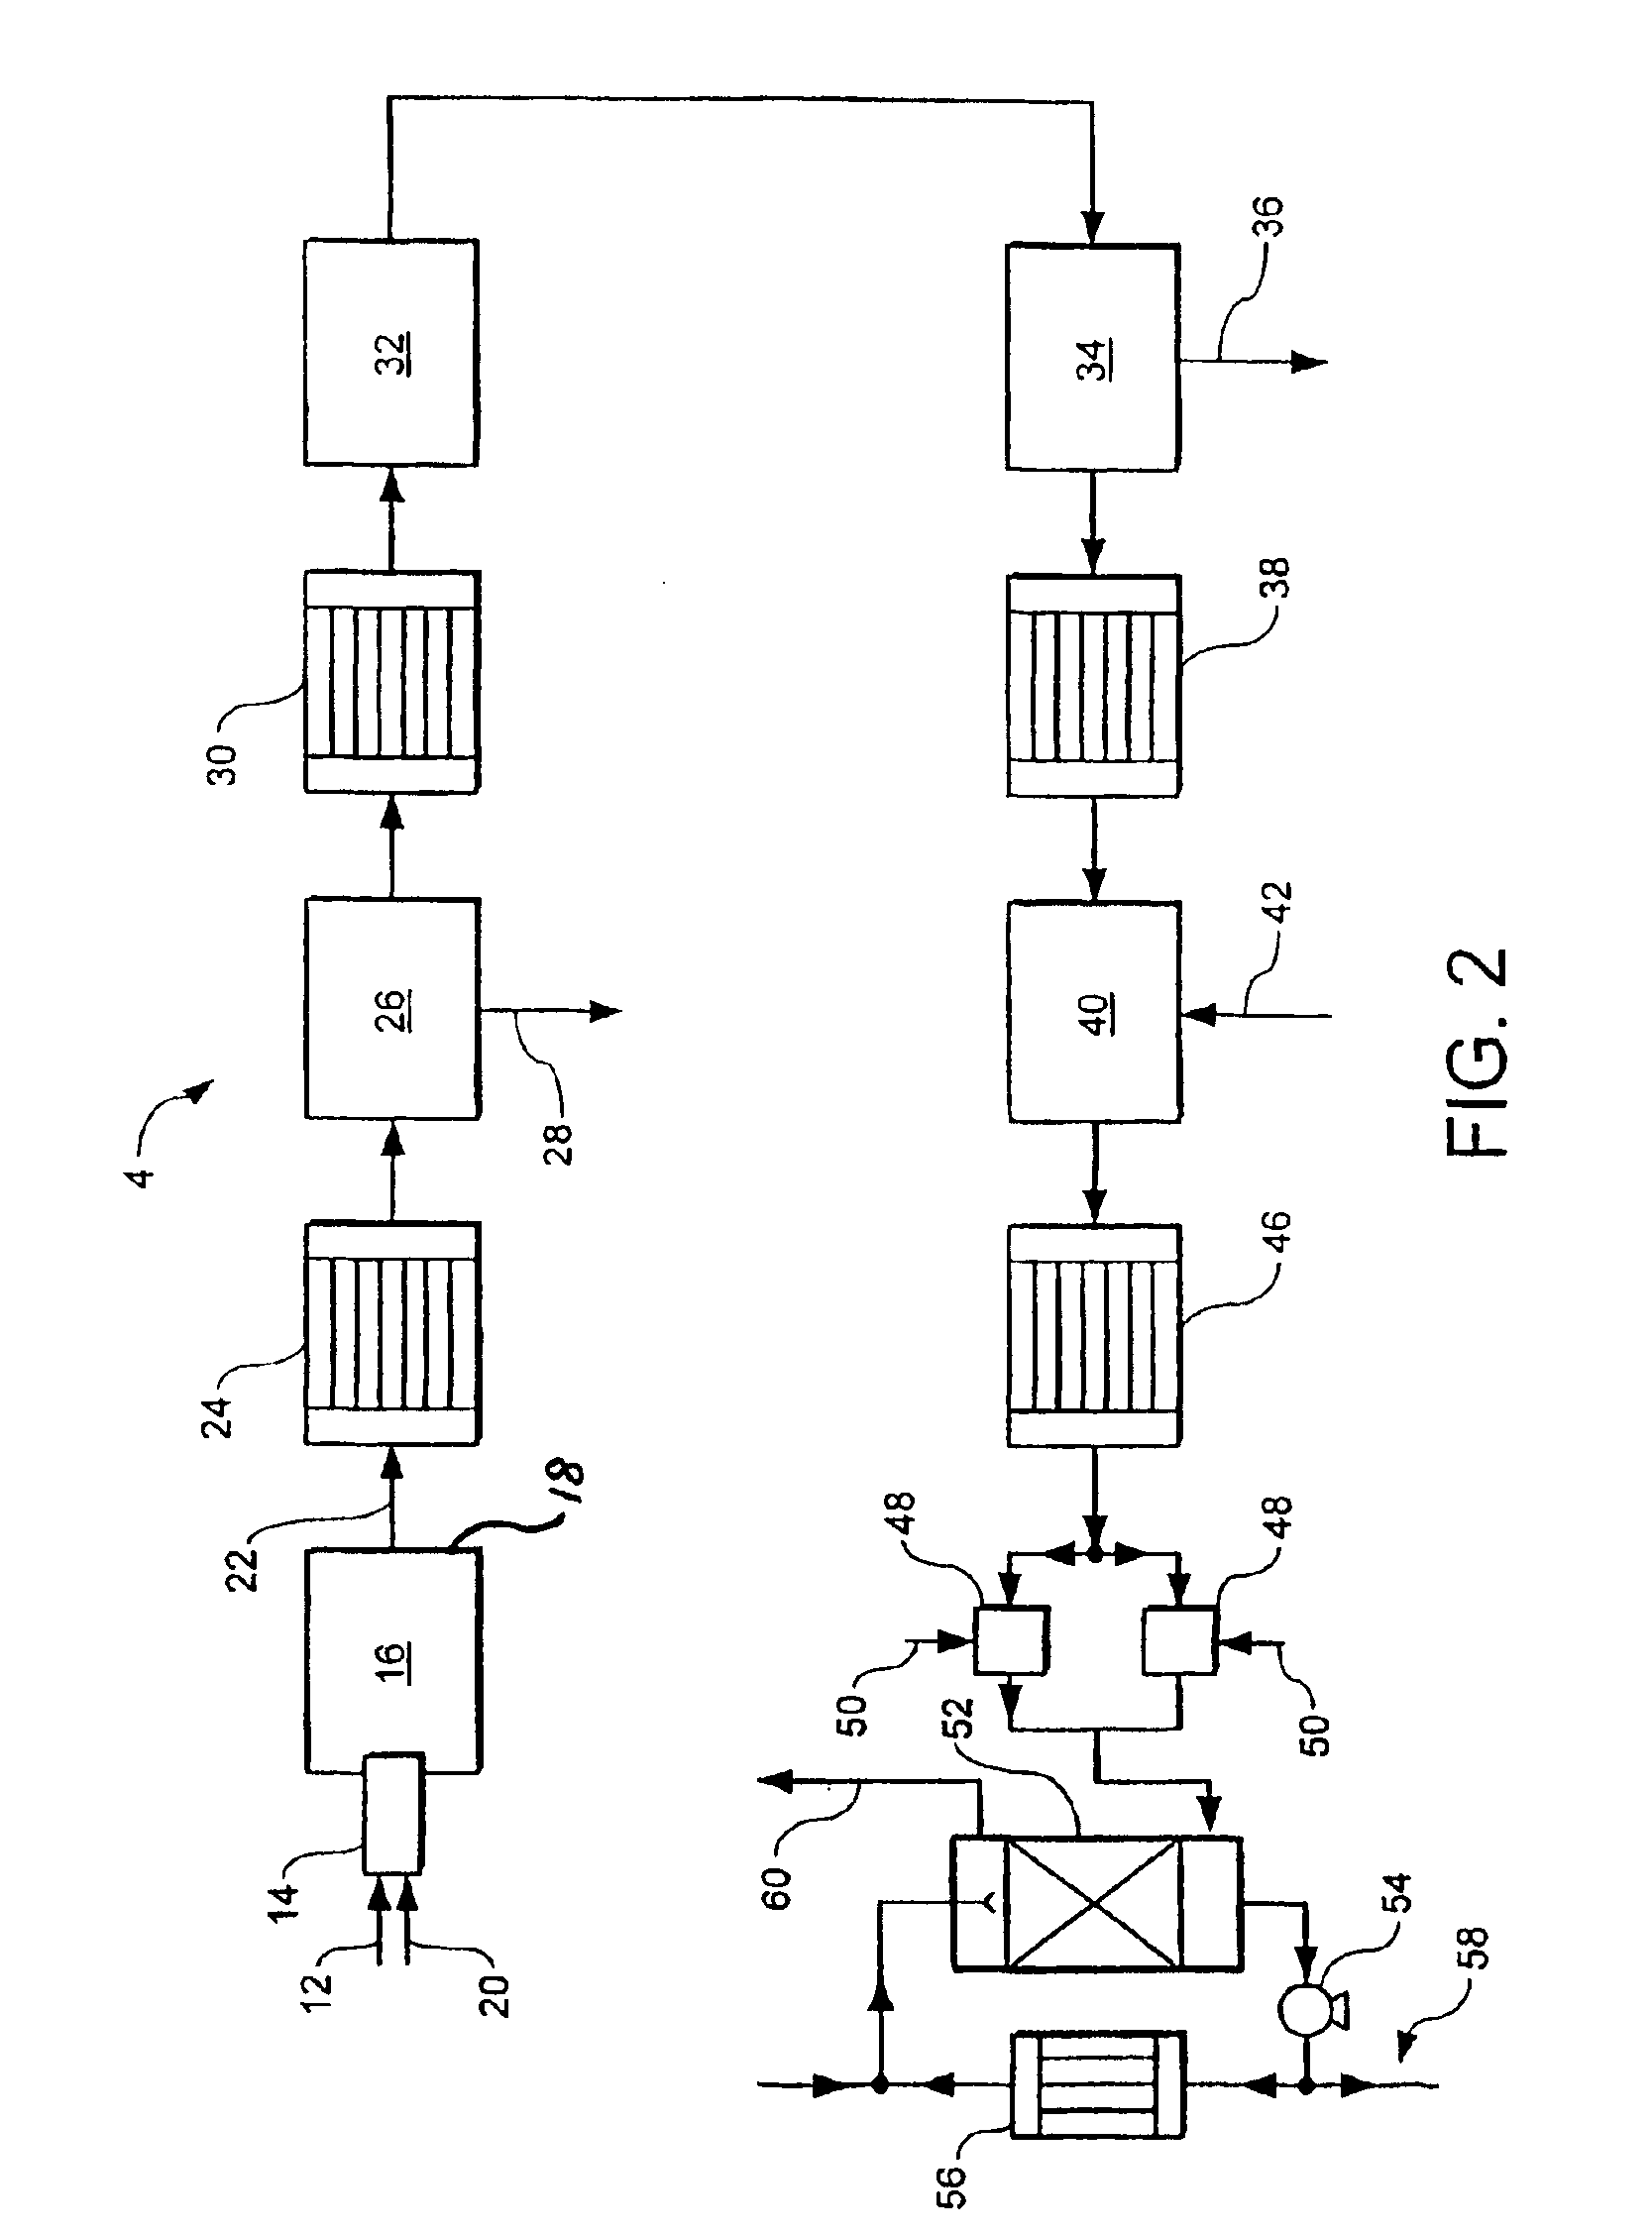 Process and apparatus for recovering sulphur from a gas stream containing hydrogen sulphide